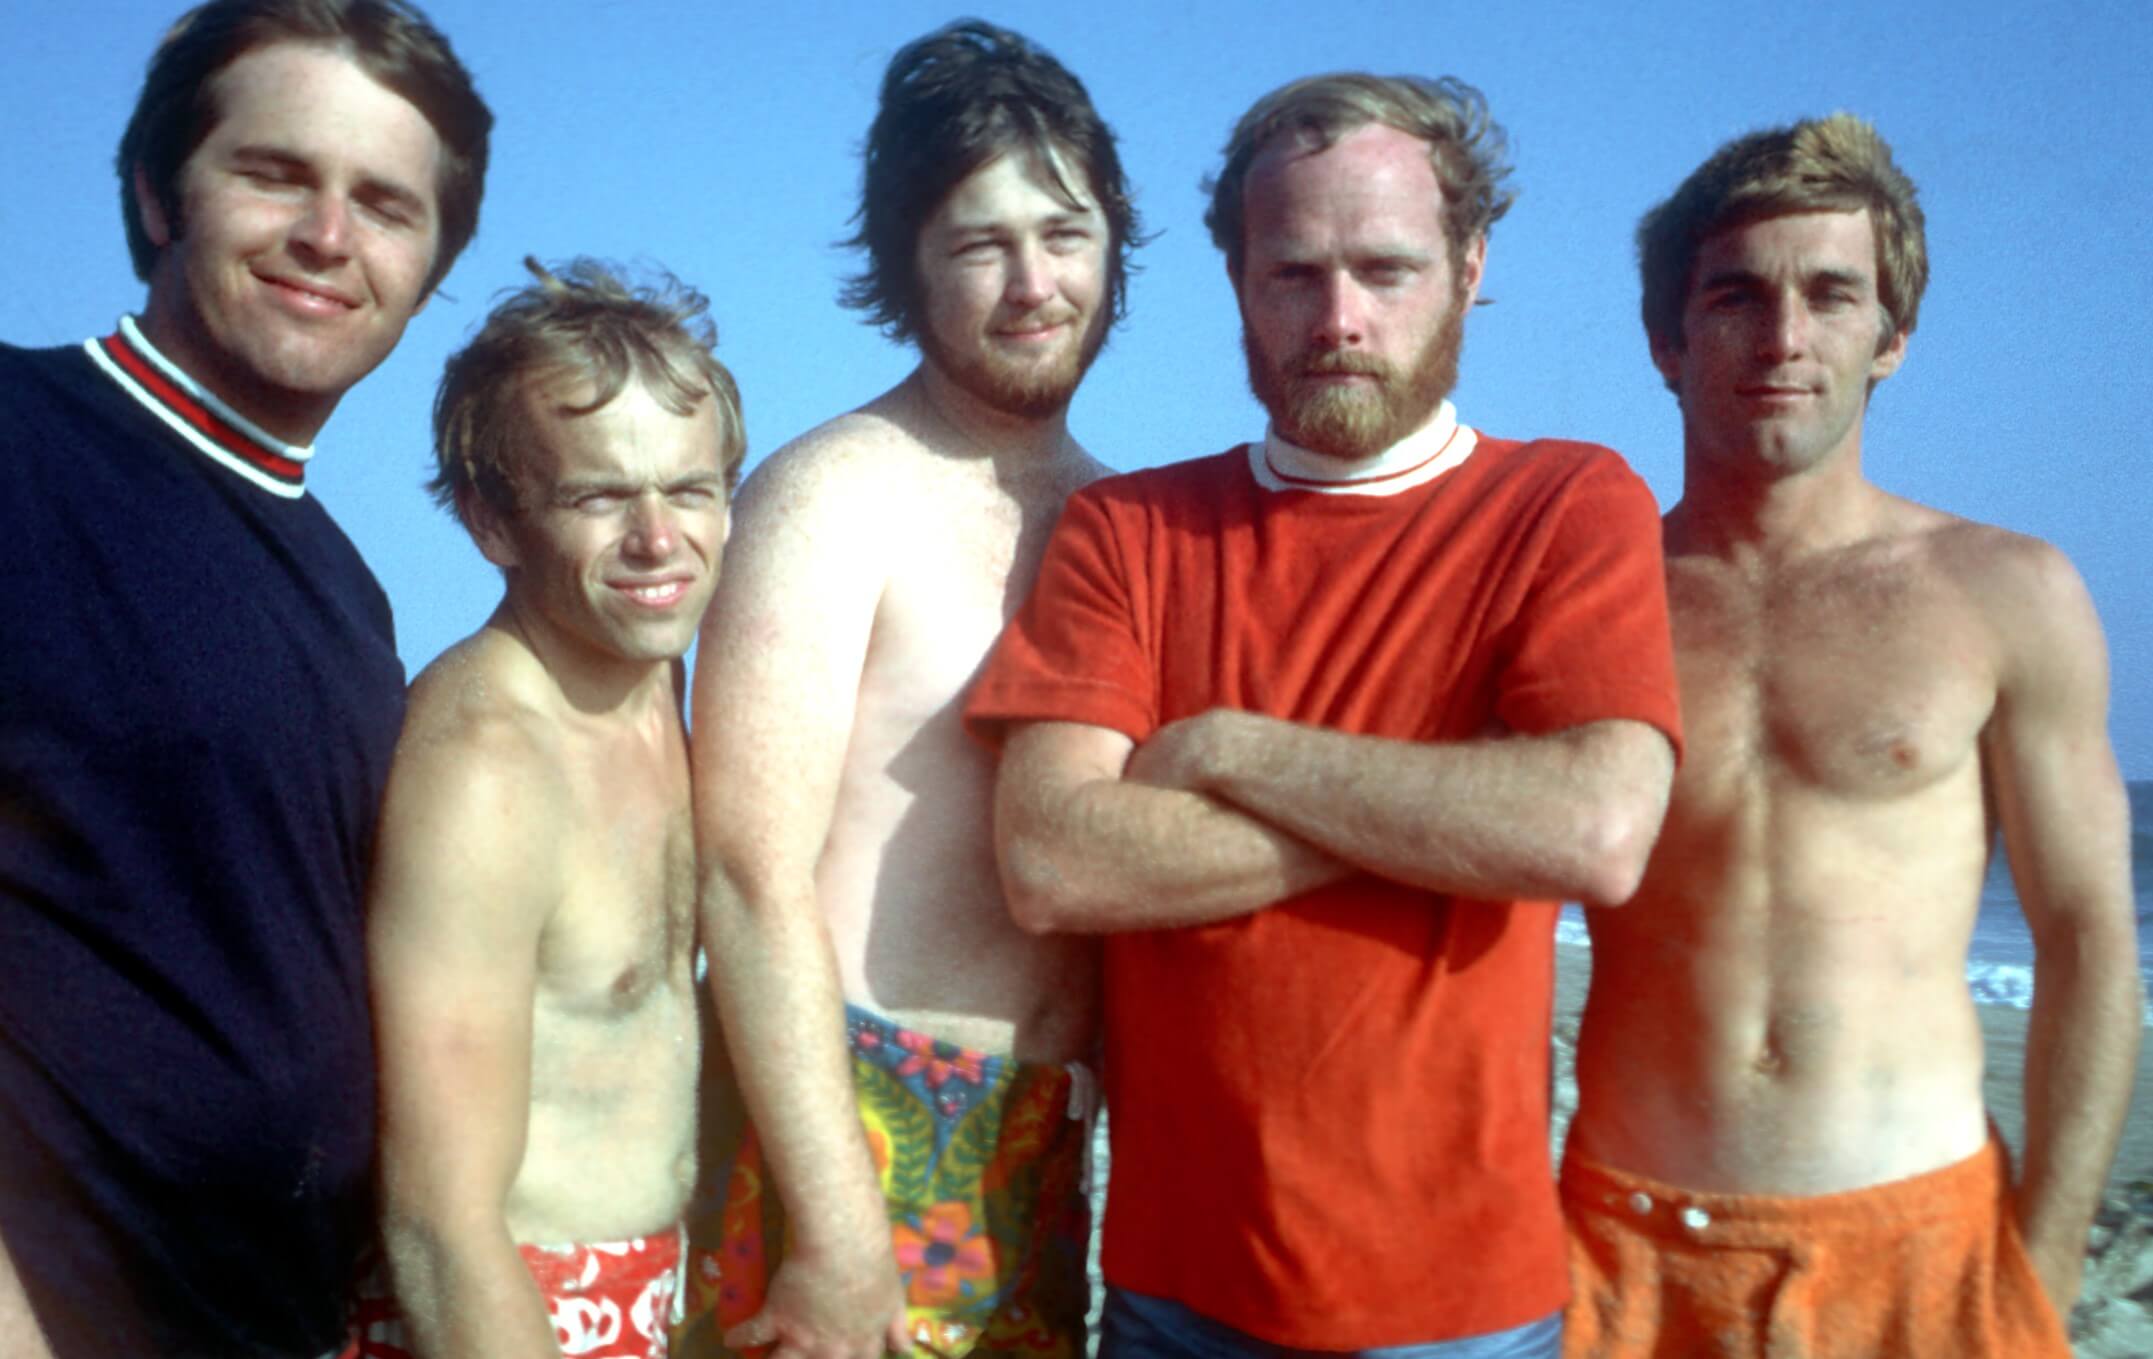 The Beach Boys in front of a blue sky